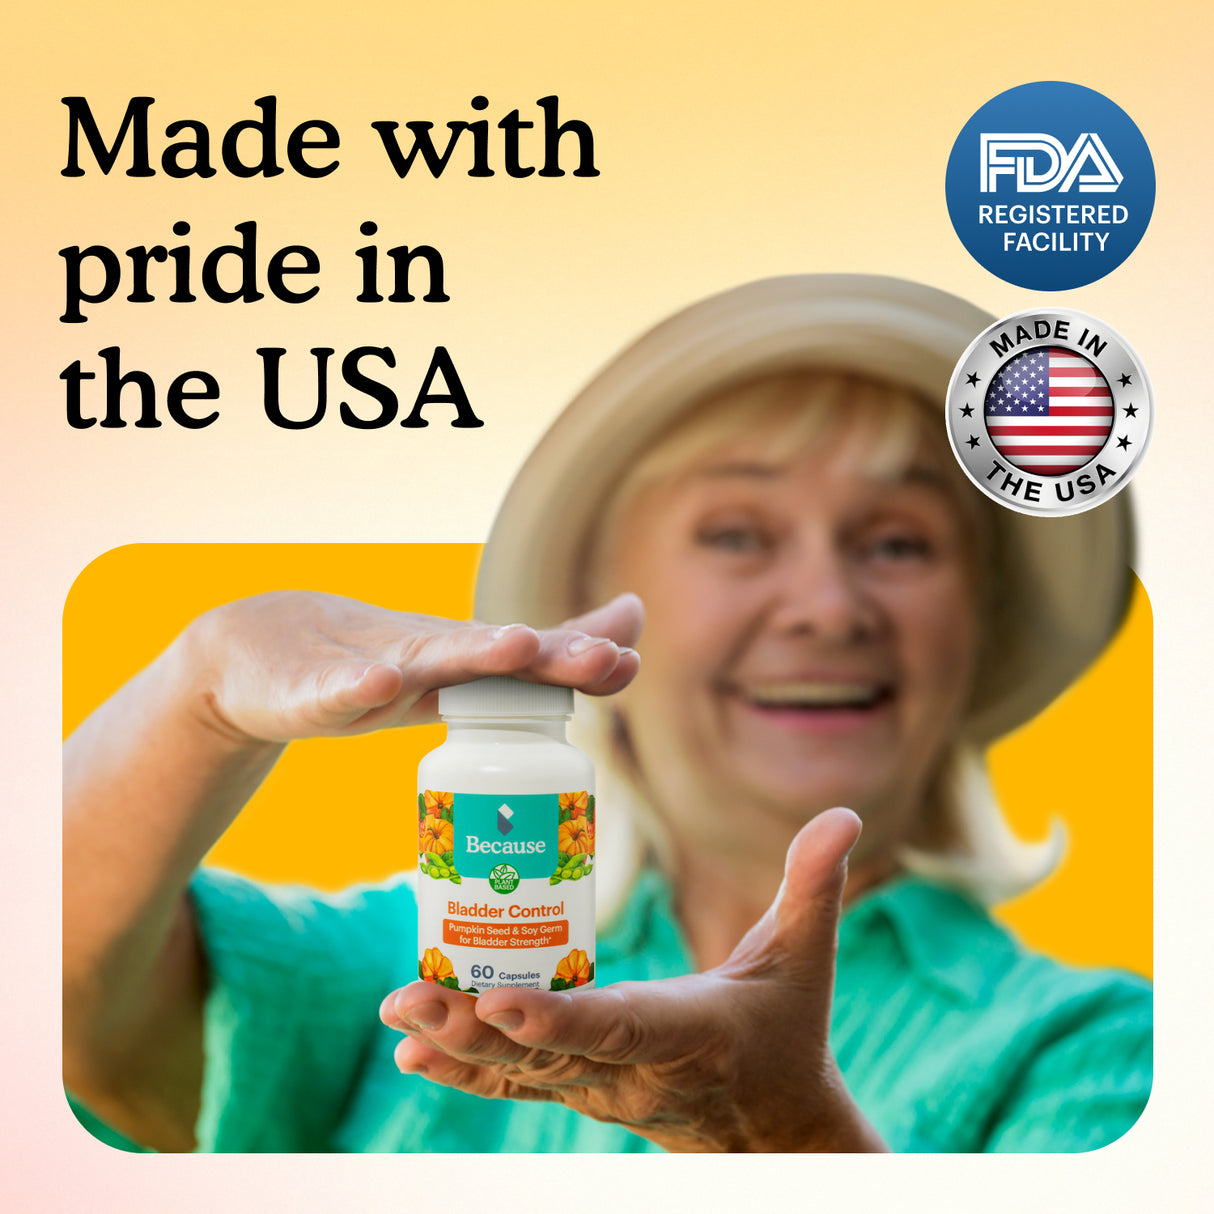 Made with pride in the USA. FDA Registered facility.